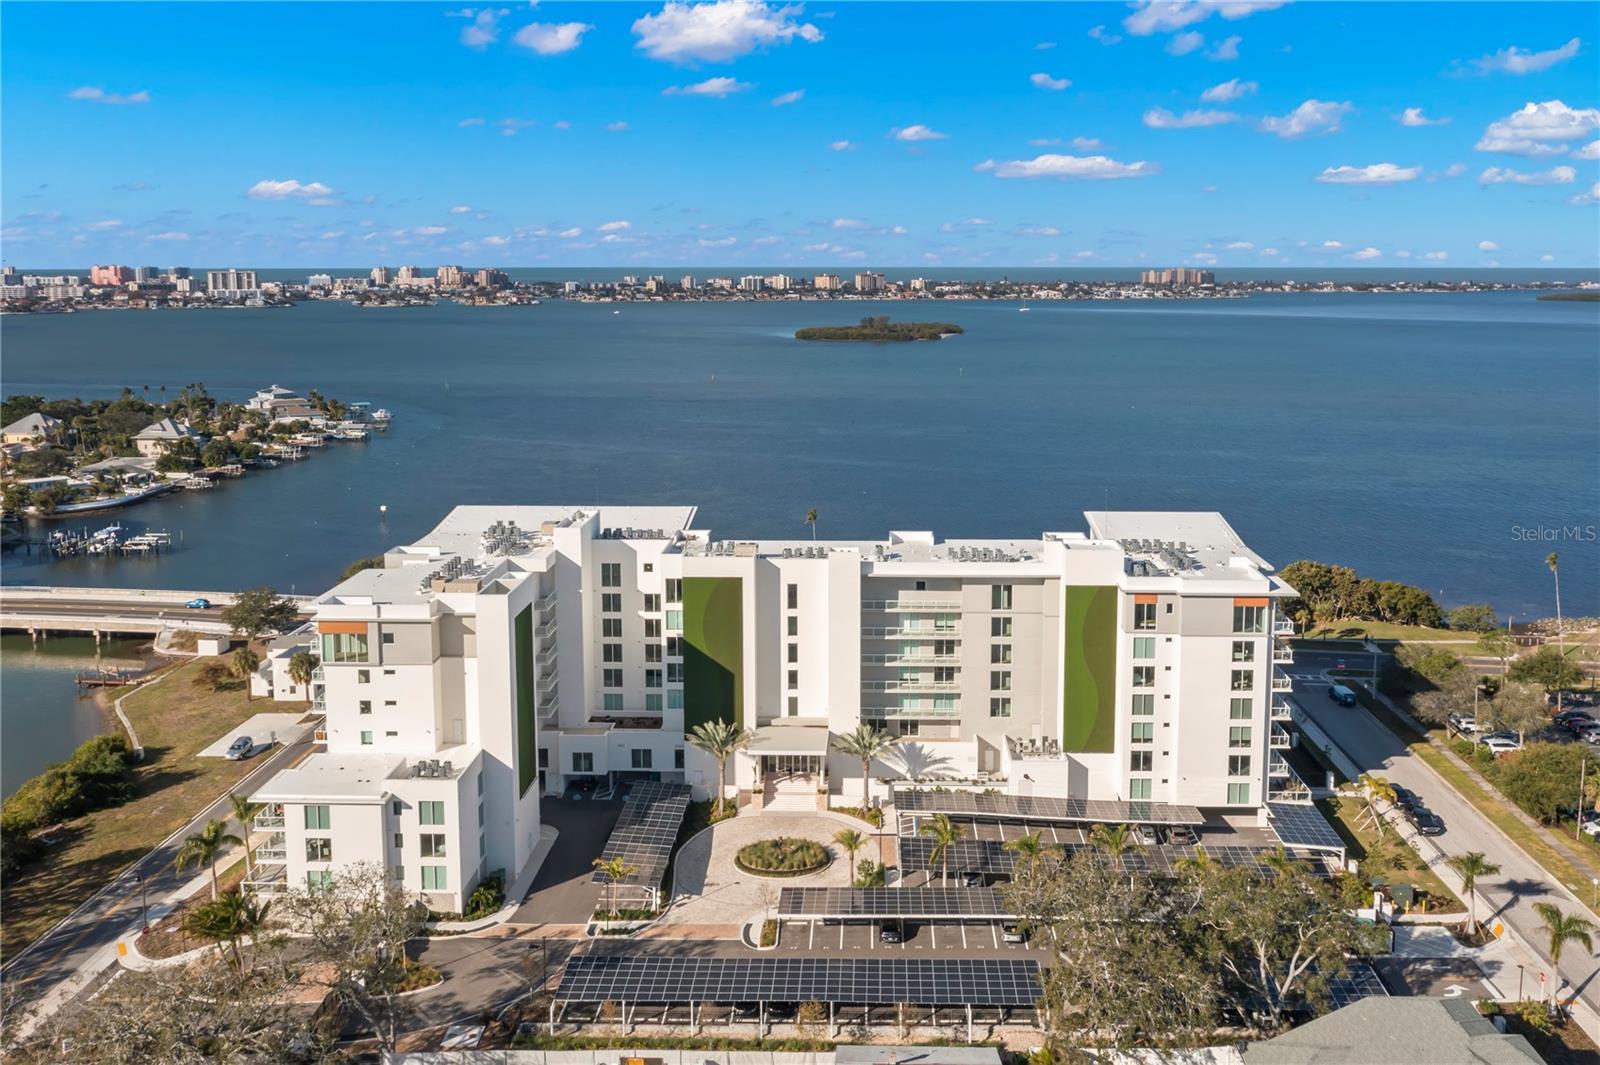 View CLEARWATER, FL 33755 condo